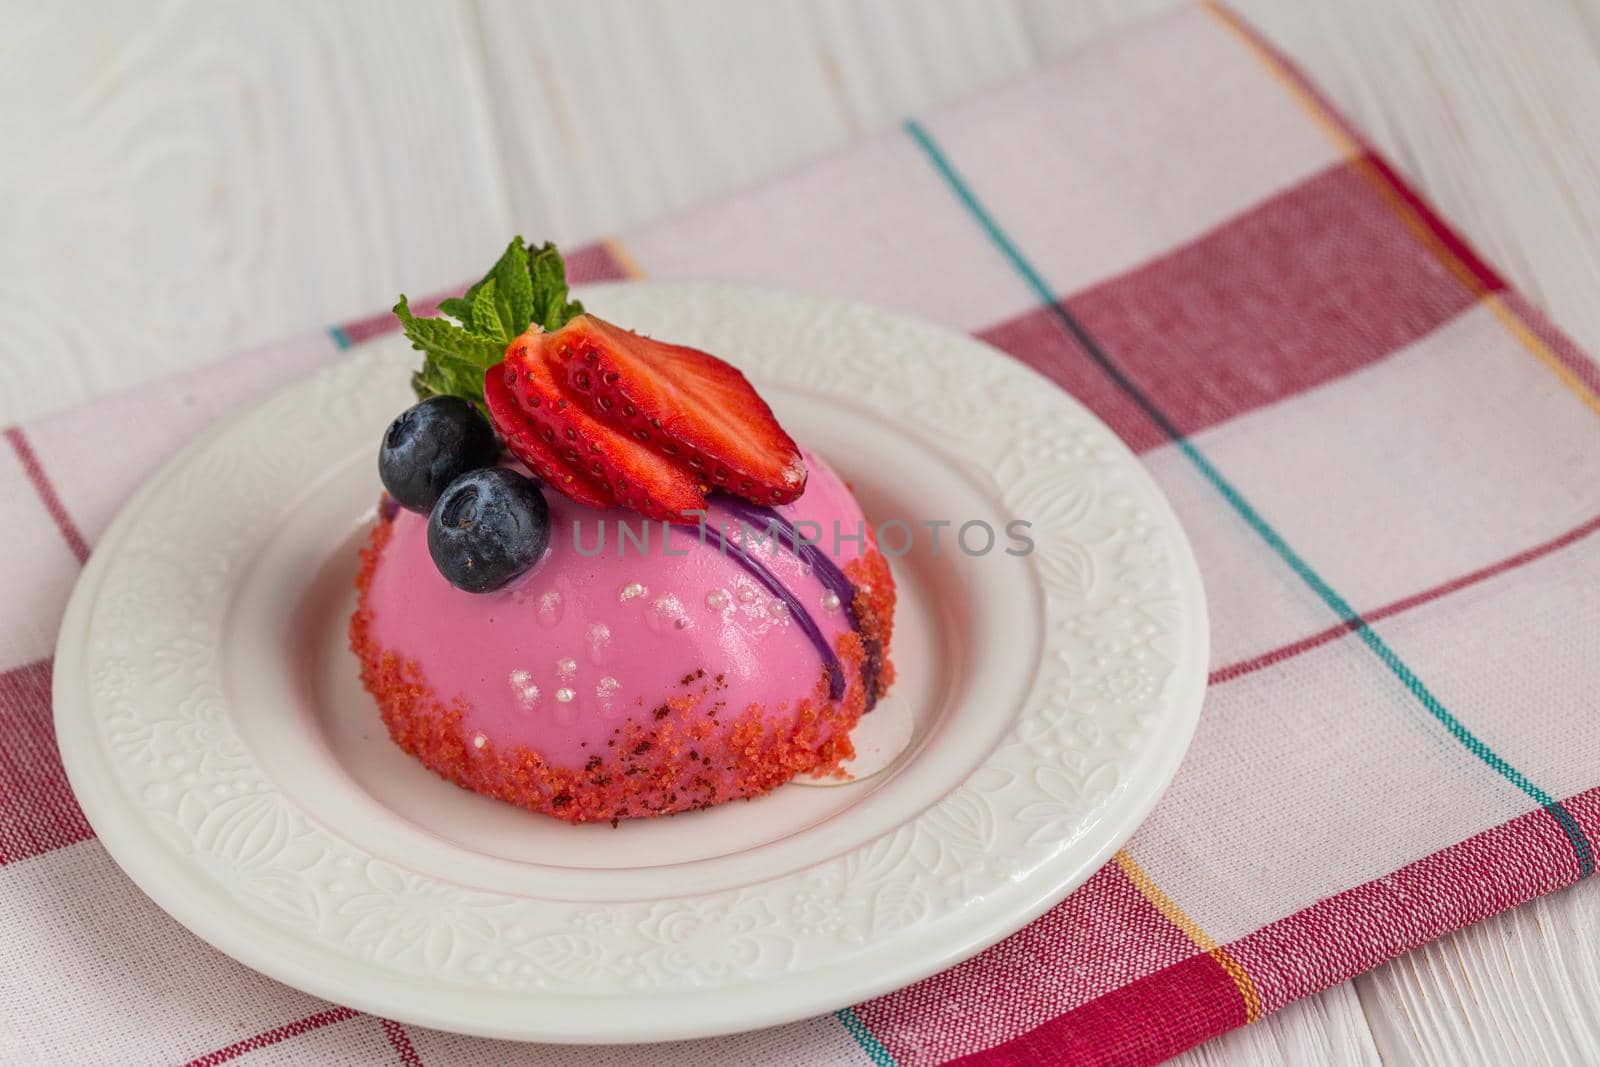 Blueberry mousse dessert on a dessert plate with confectionery glaze and sliced strawberries.